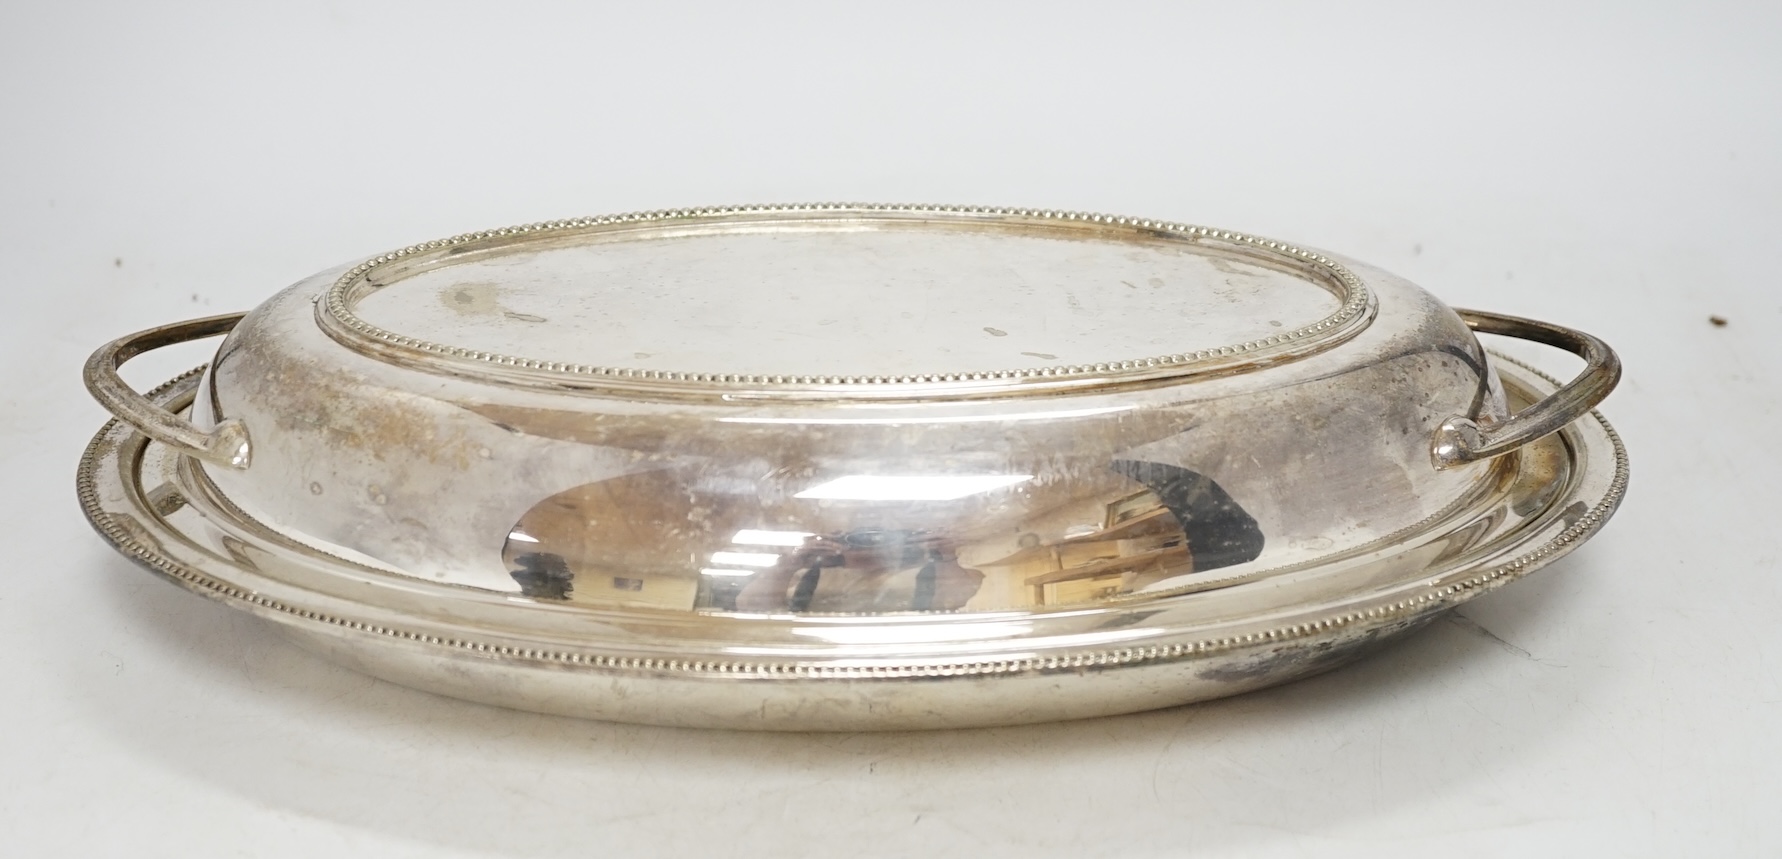 A quantity of plated tureens. Condition - fair